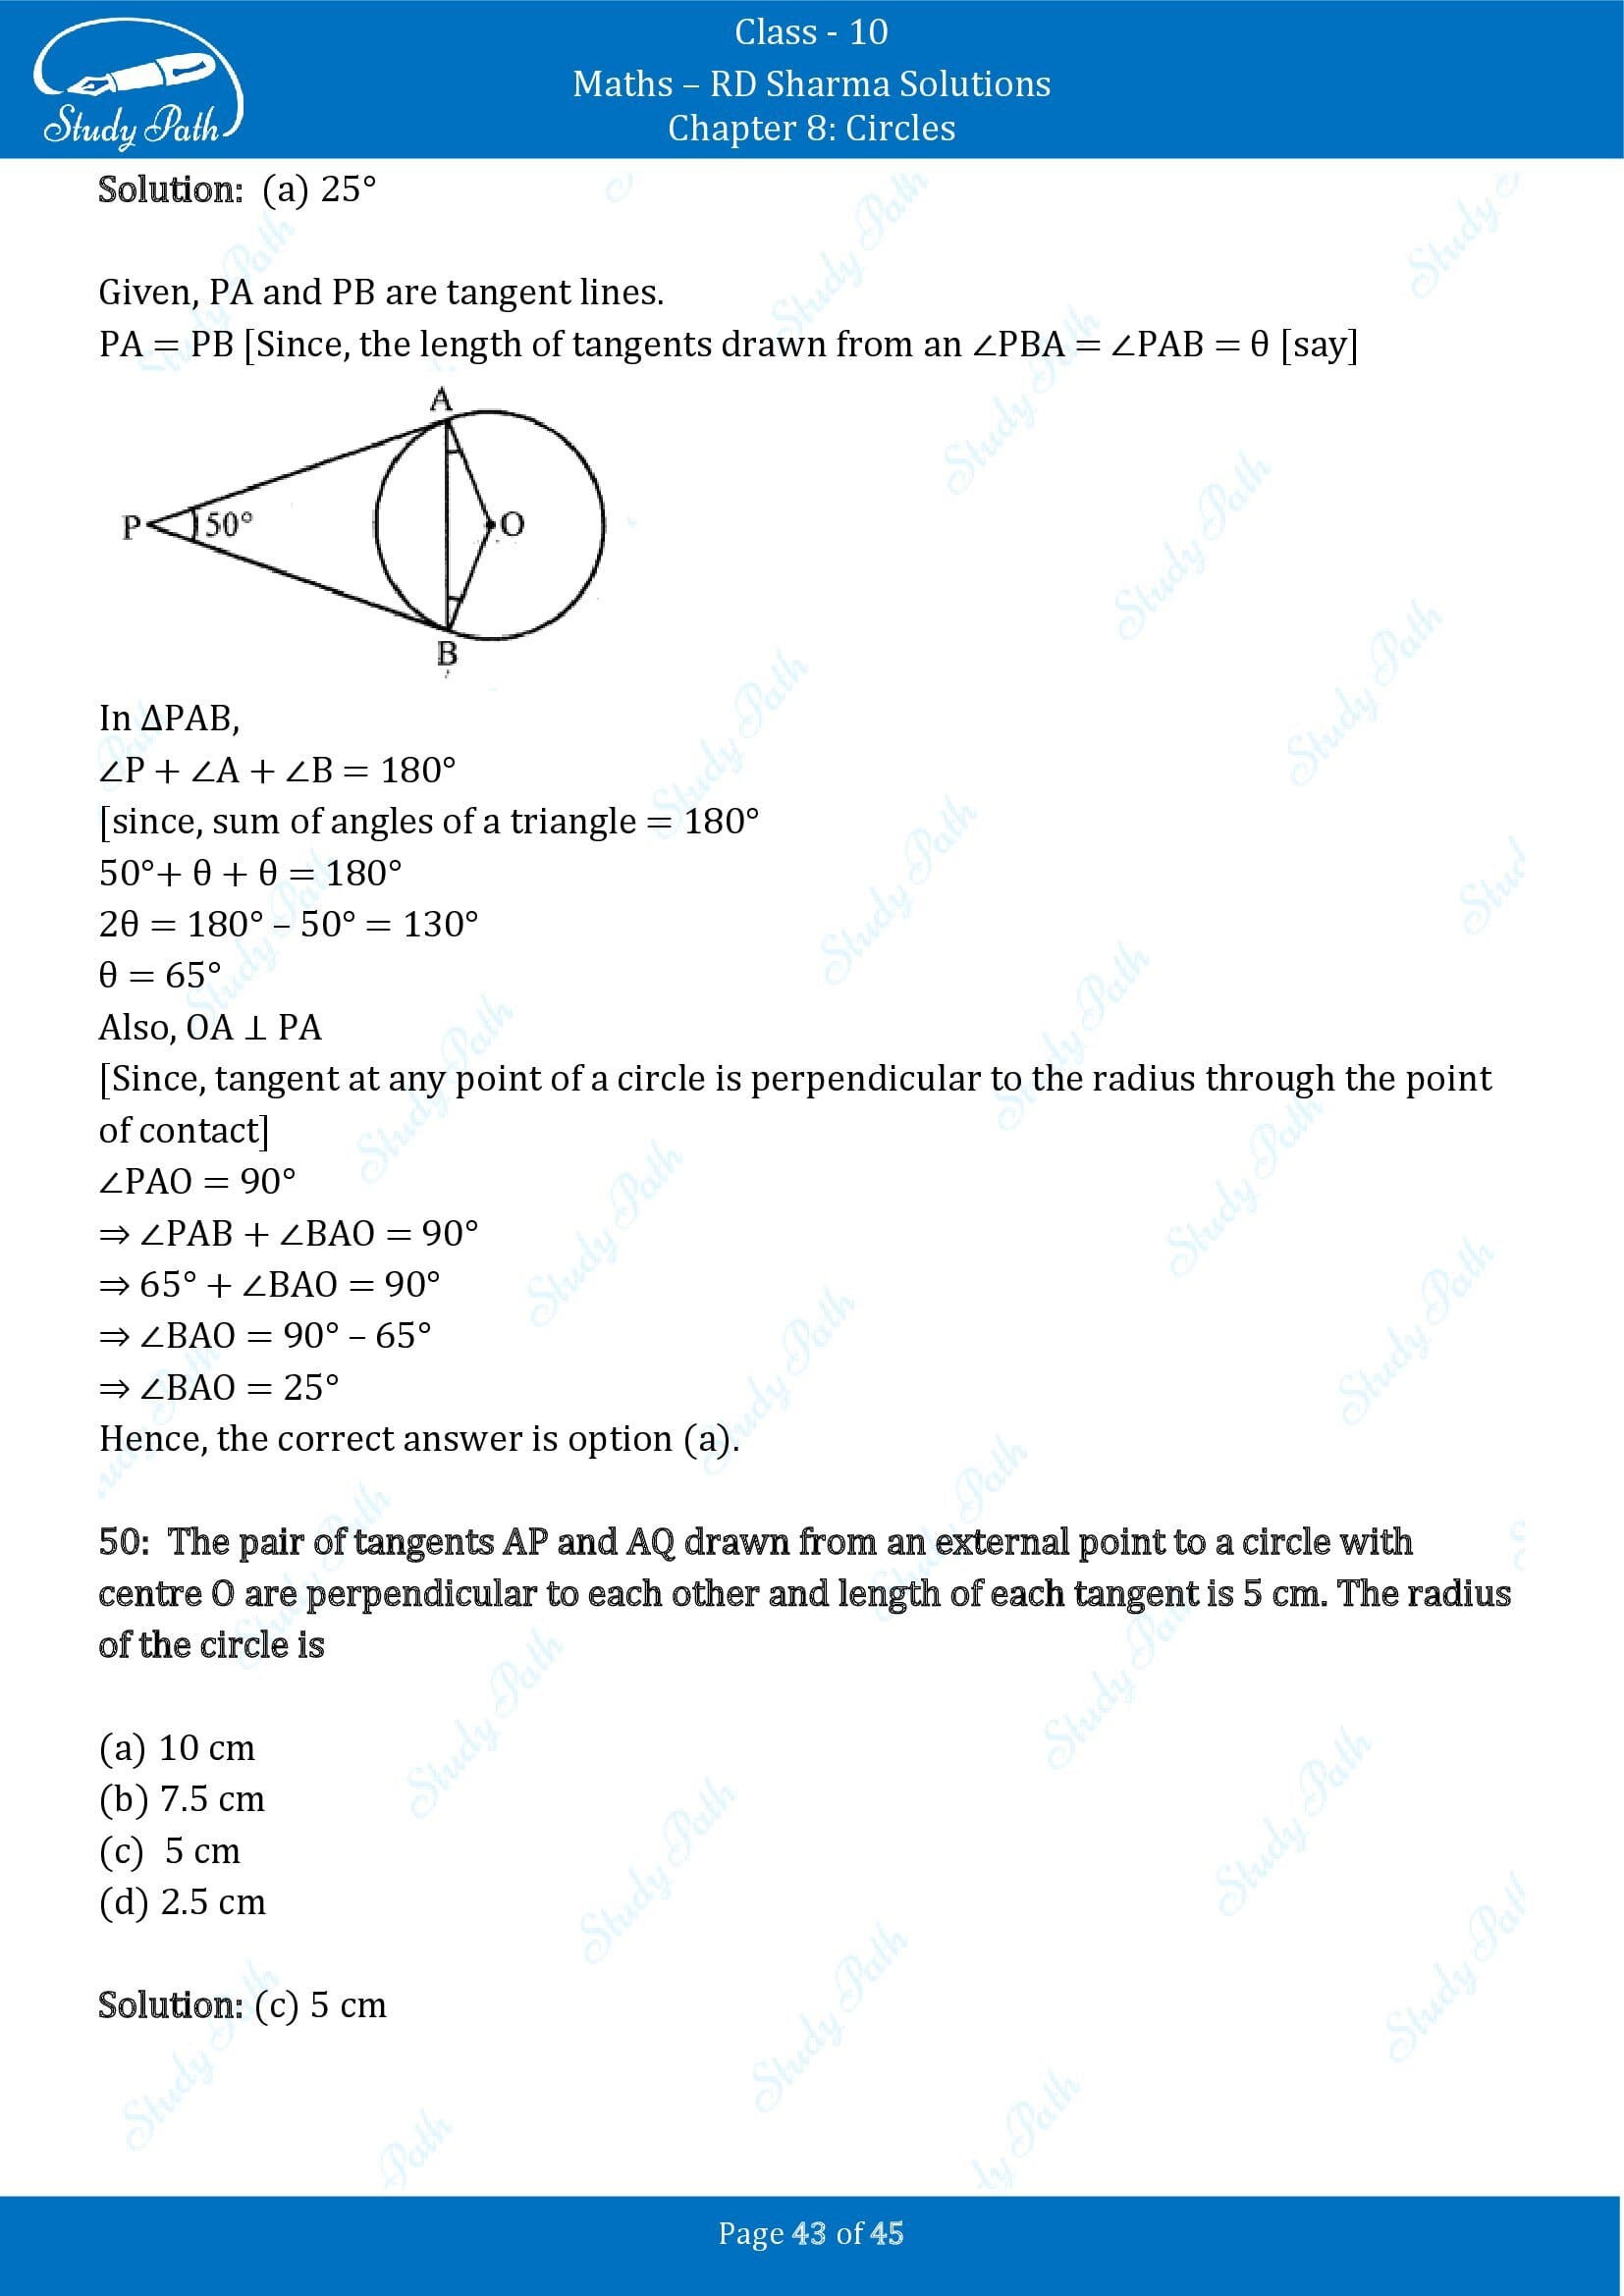 RD Sharma Solutions Class 10 Chapter 8 Circles Multiple Choice Questions MCQs 00043